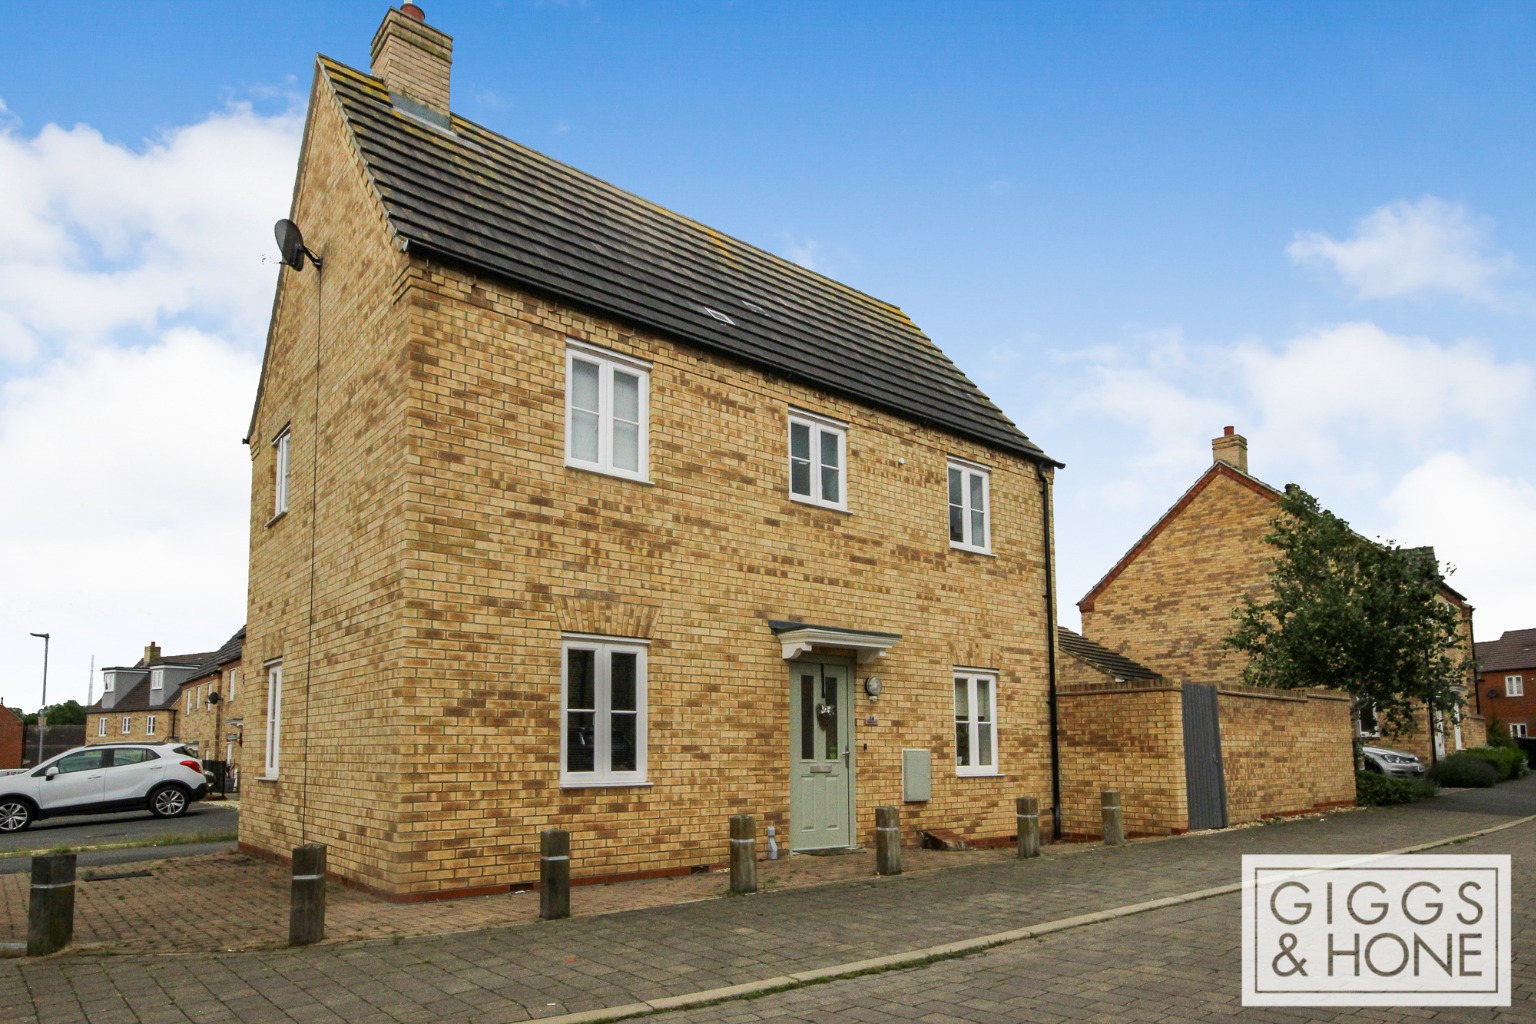 A modern three-bedroom detached home on a corner plot in the popular 